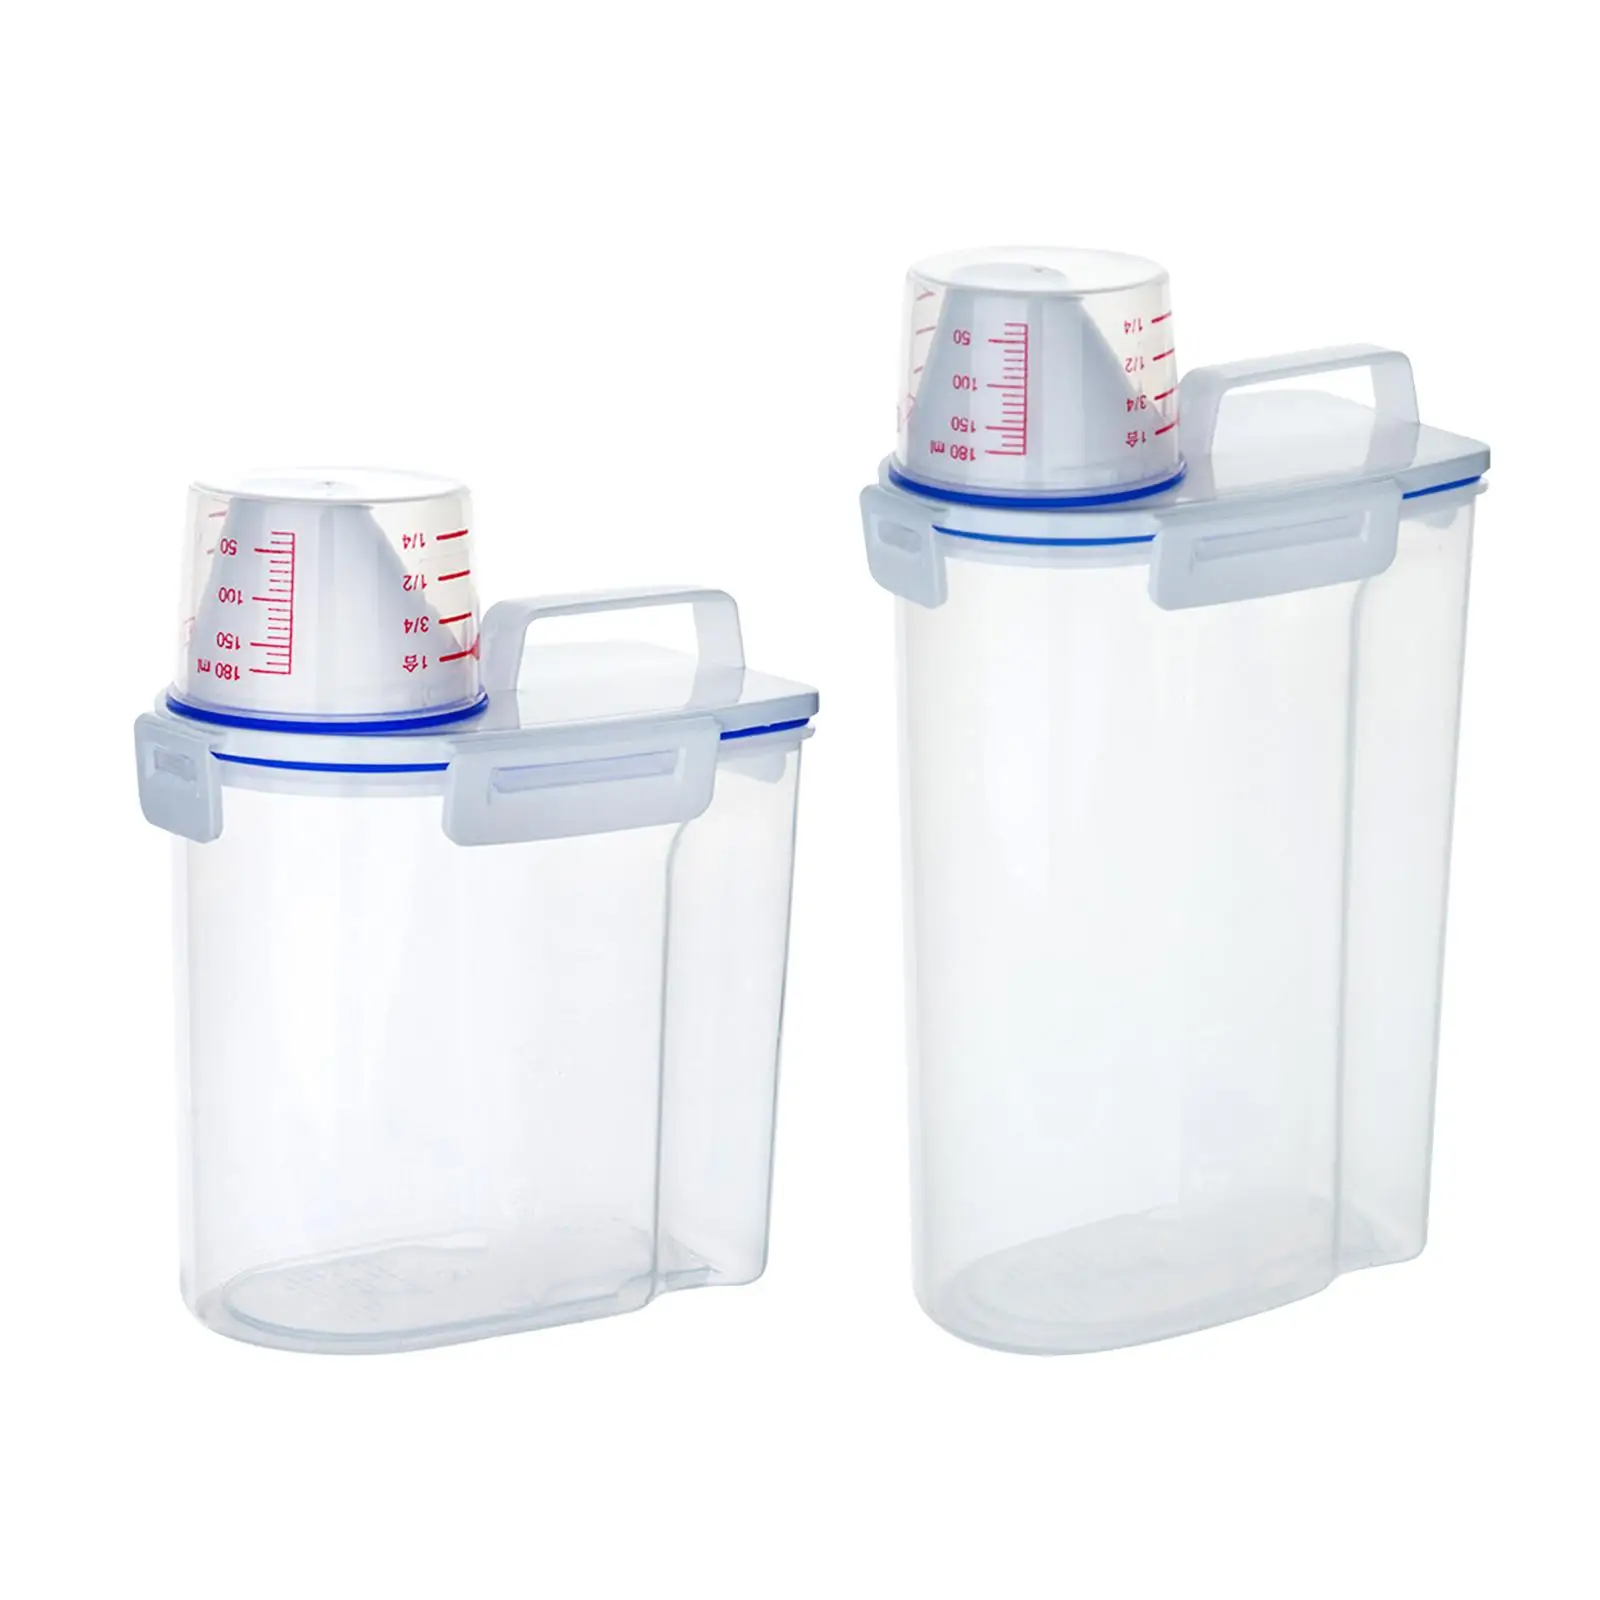 Airtight Cereal Container Storage Canister with Measuring Cup Dry Food Storage Container for Grain Sugar Rice Snack Cereal